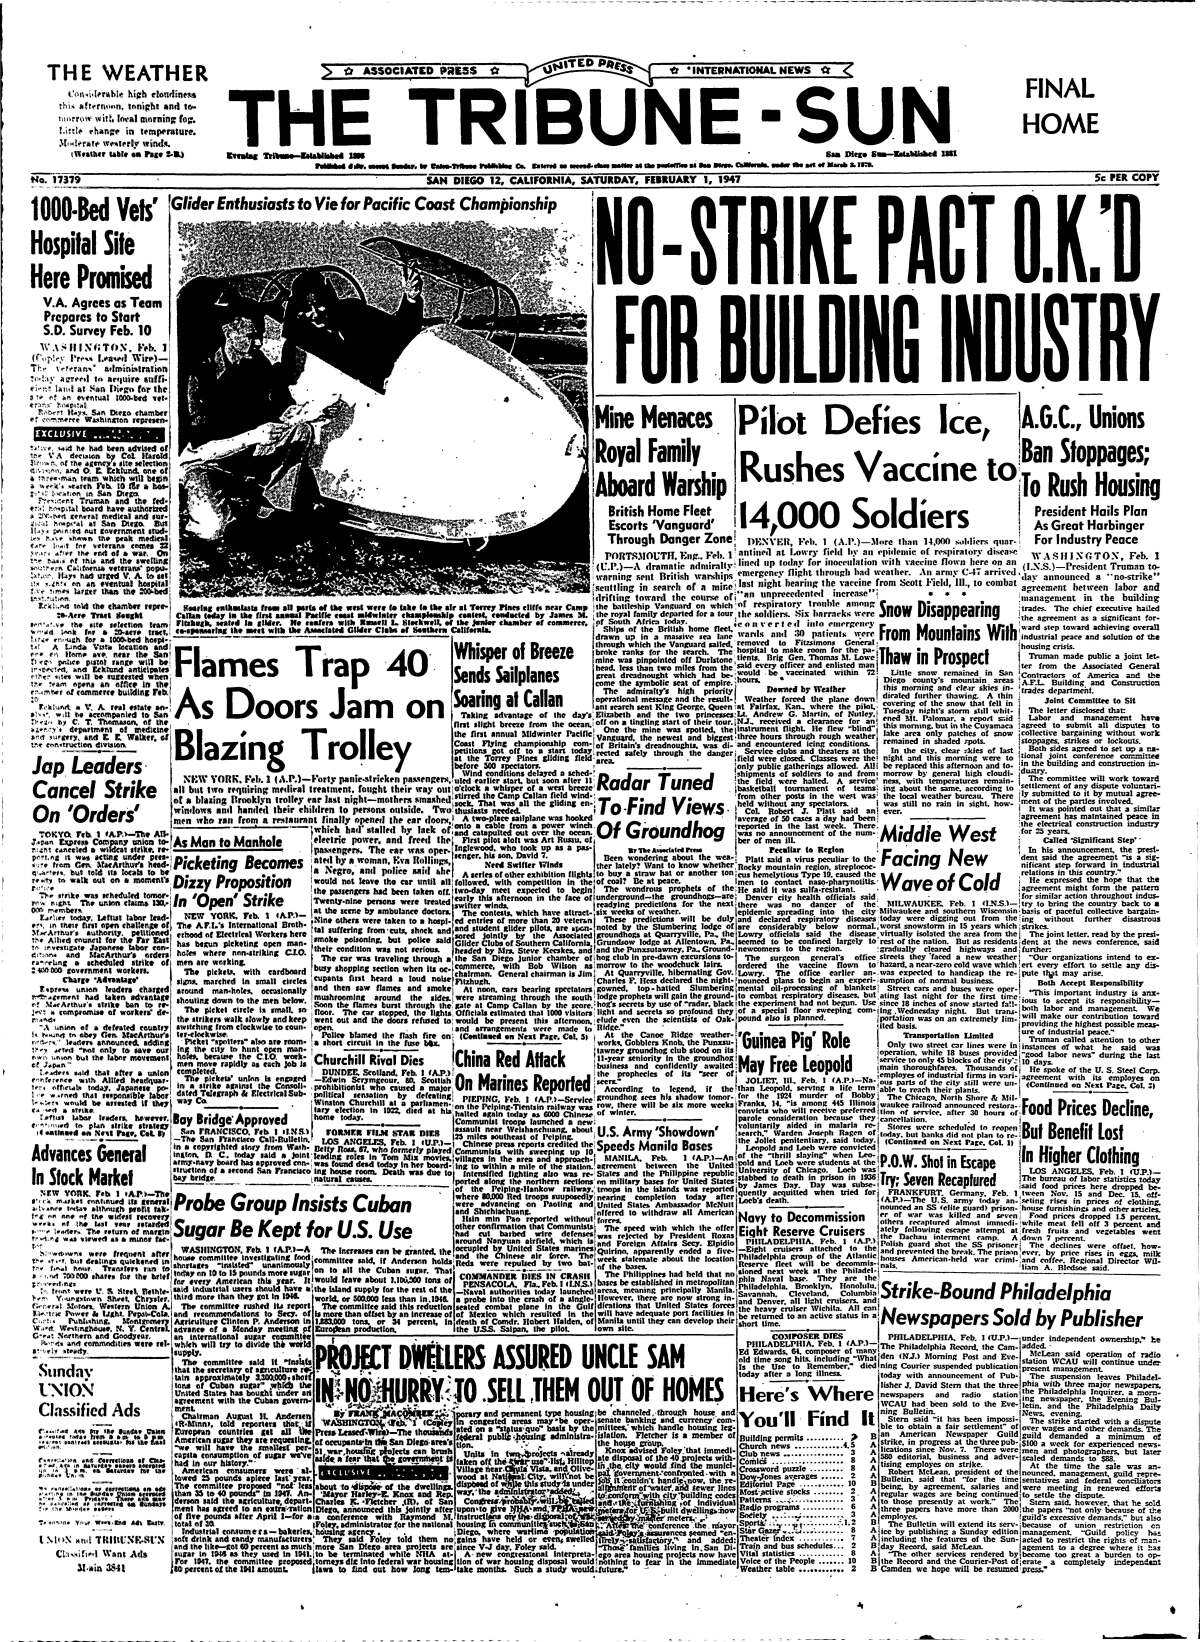 Front page of the Tribune-Sun, Feb. 1, 1947.